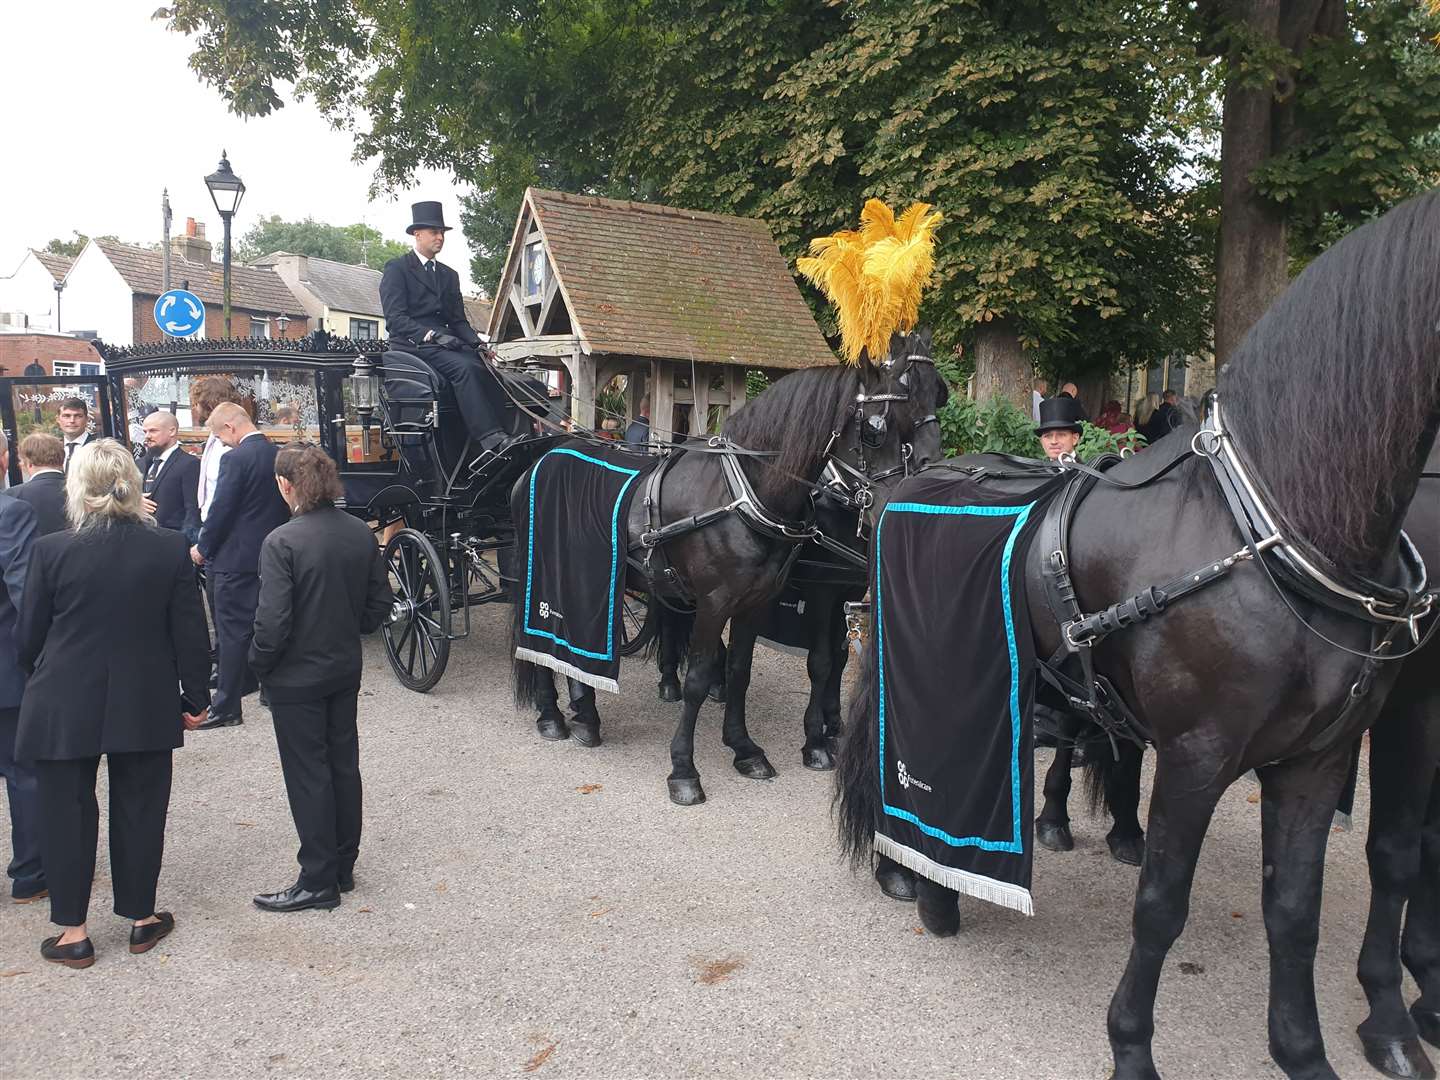 The funeral cortege, which incldued a horse-drawn hearse, wound its way through Herne Bay before arriving at St Martin's Church